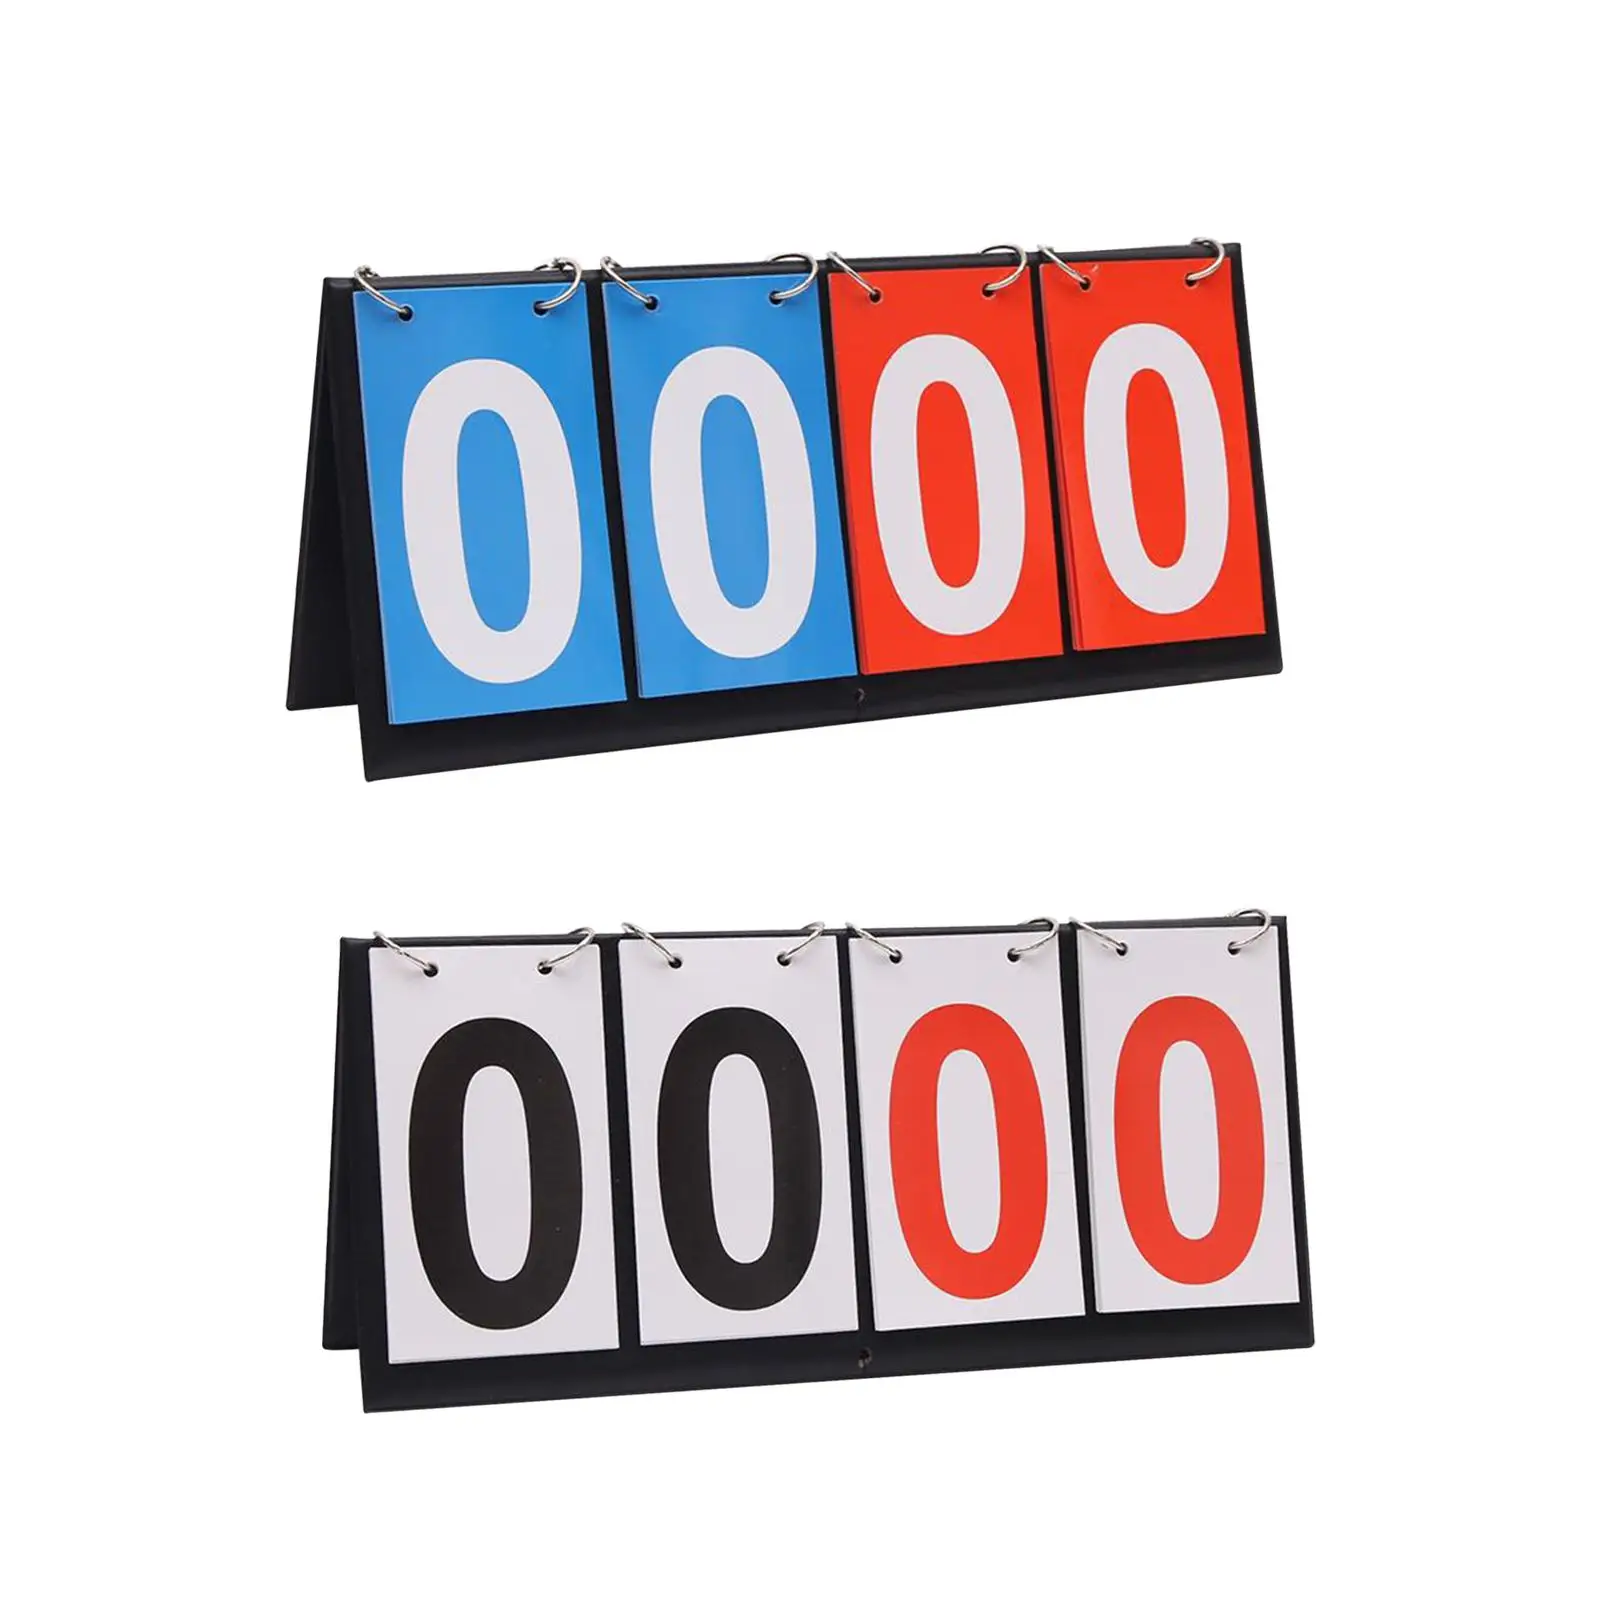 Tabletop Scoreboard 0-99 Soccer Referee Score Board Scorekeeper for Basketball Indoor Sports Team Games Pingpong Ball Volleyball